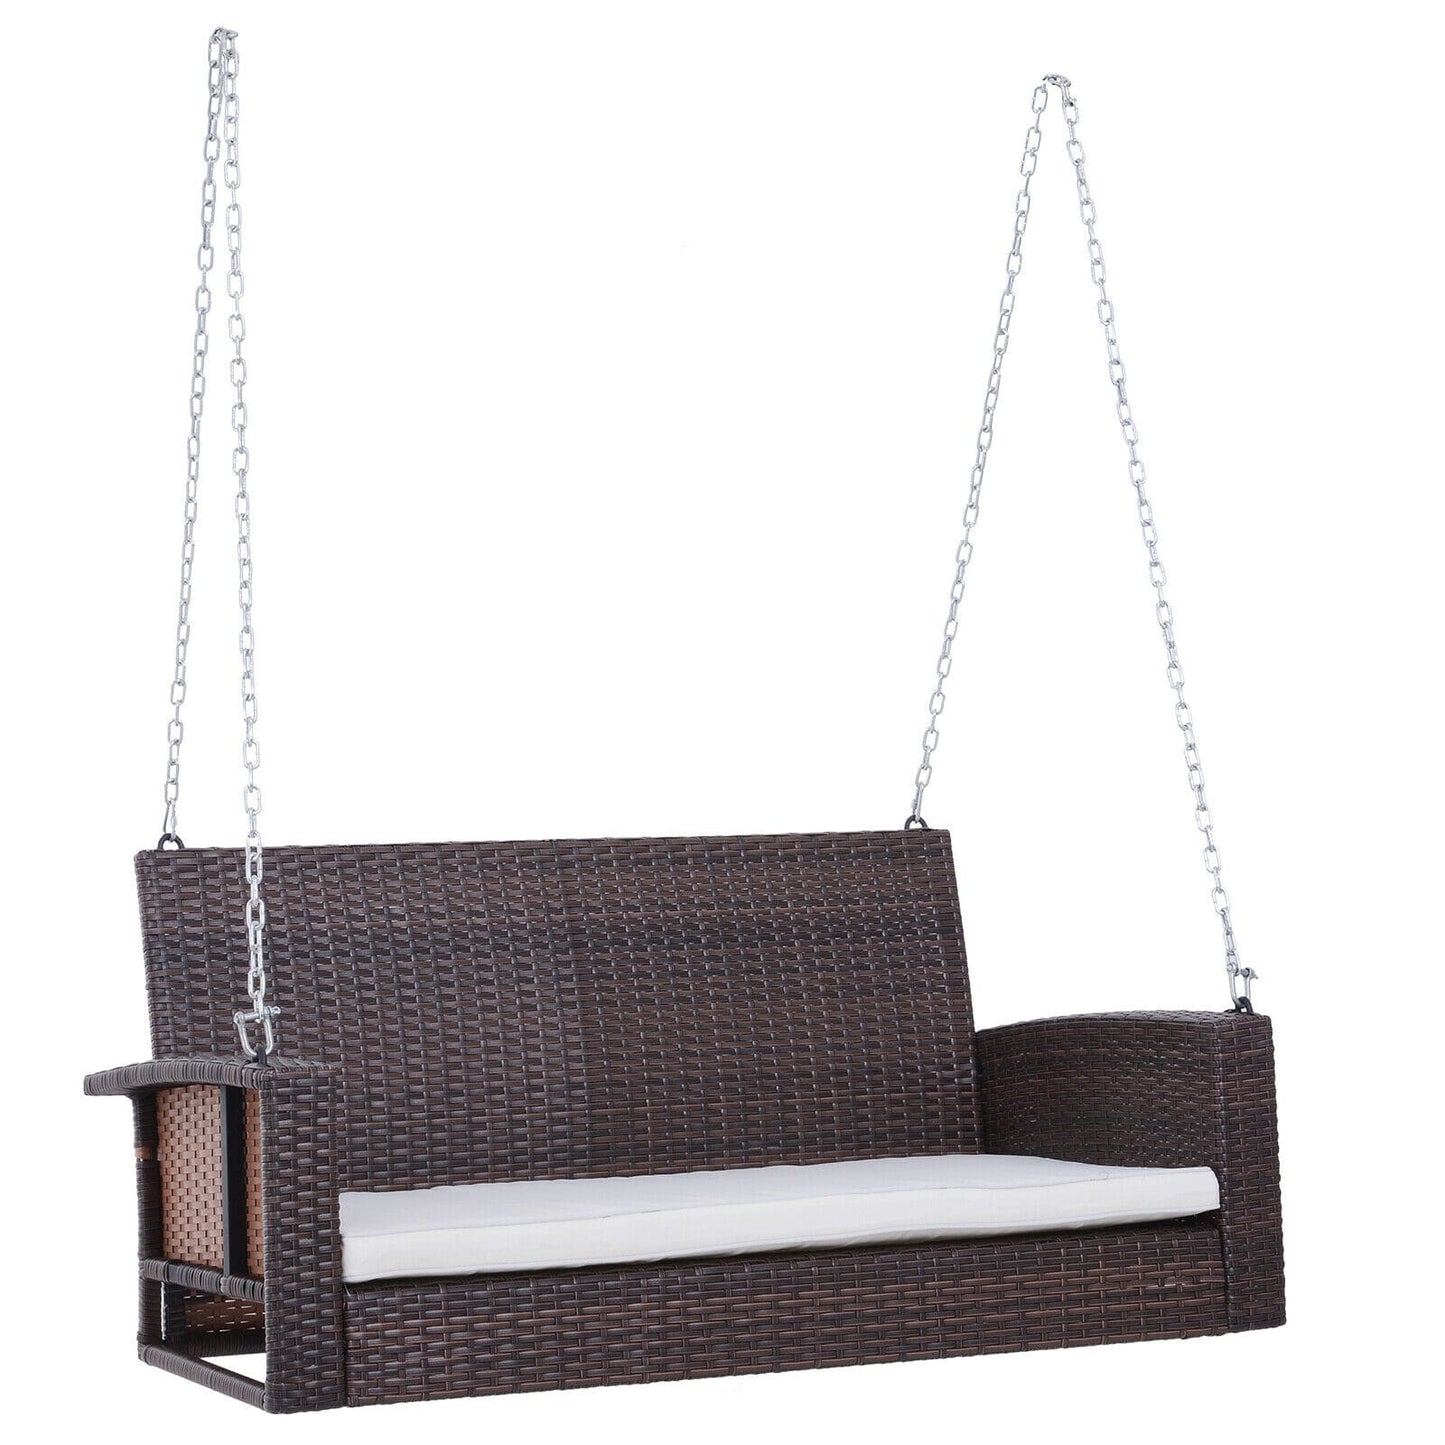 2 Person Porch Swing - Outdoor Wicker Porch Swing - Chair Garden Hanging Bench Seat